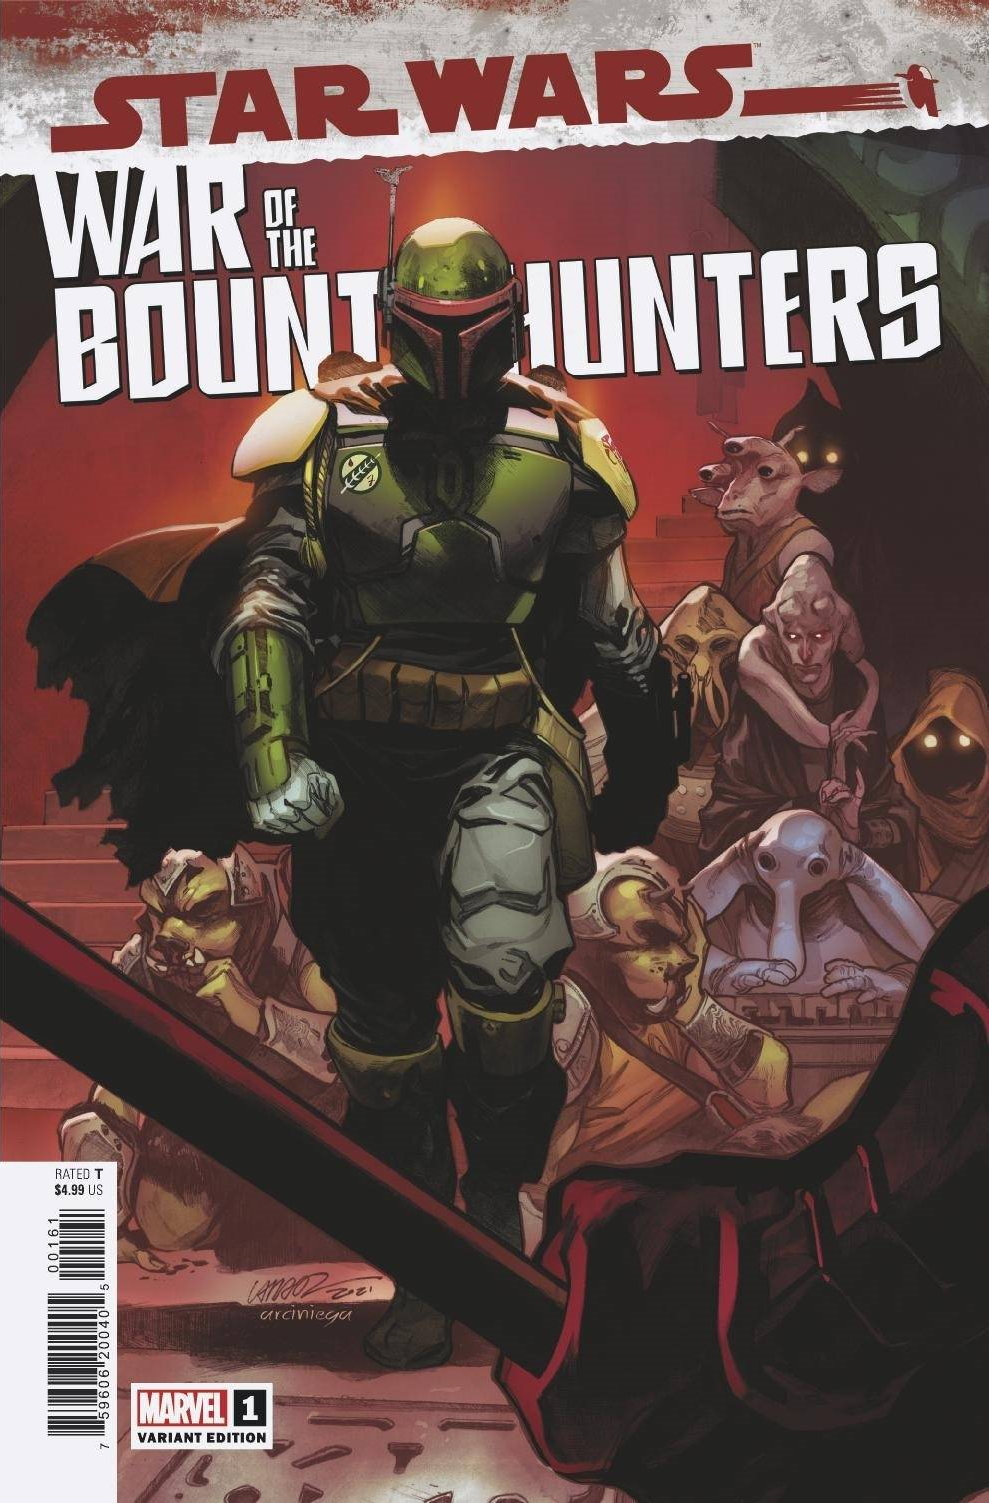 War of the Bounty Hunters #1 (Pepe Larraz Variant Cover) (02.06.2021)